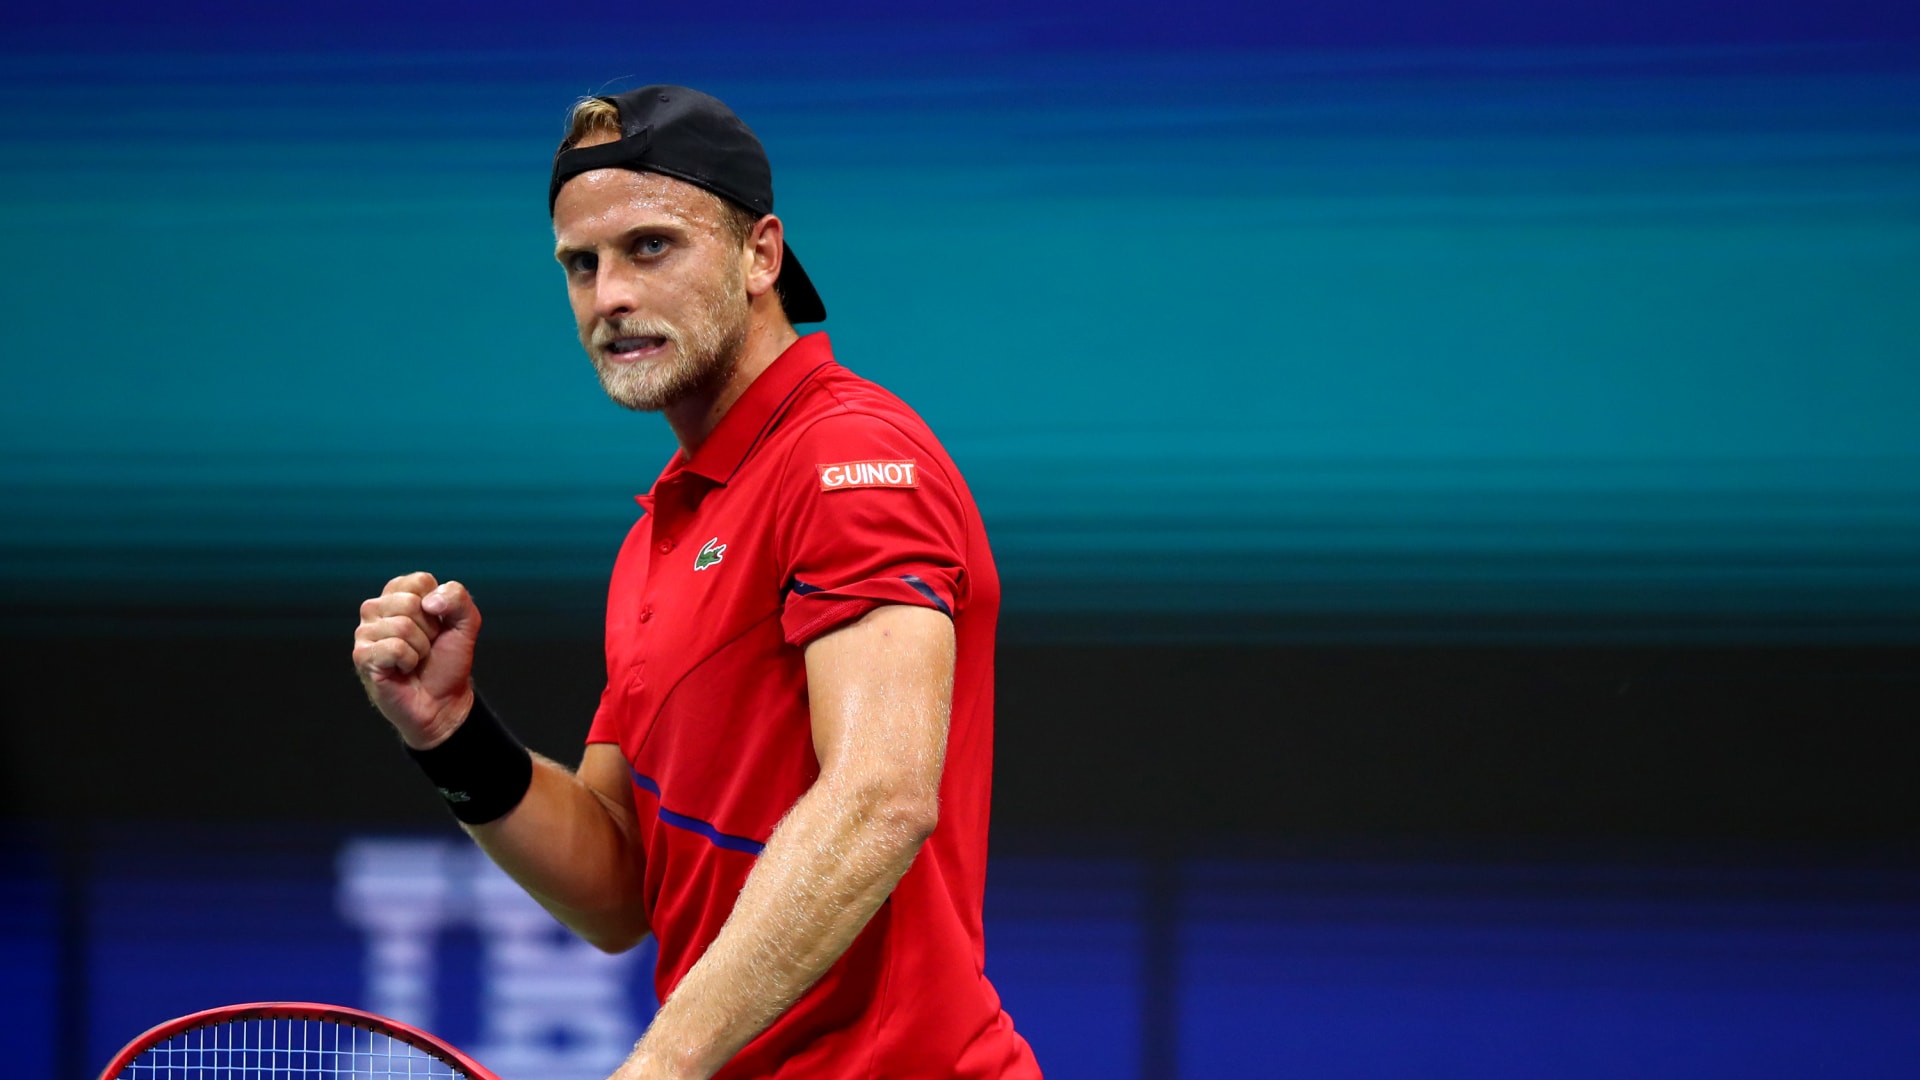 10 years in, Denis Kudla continues to navigate life on the pro tour